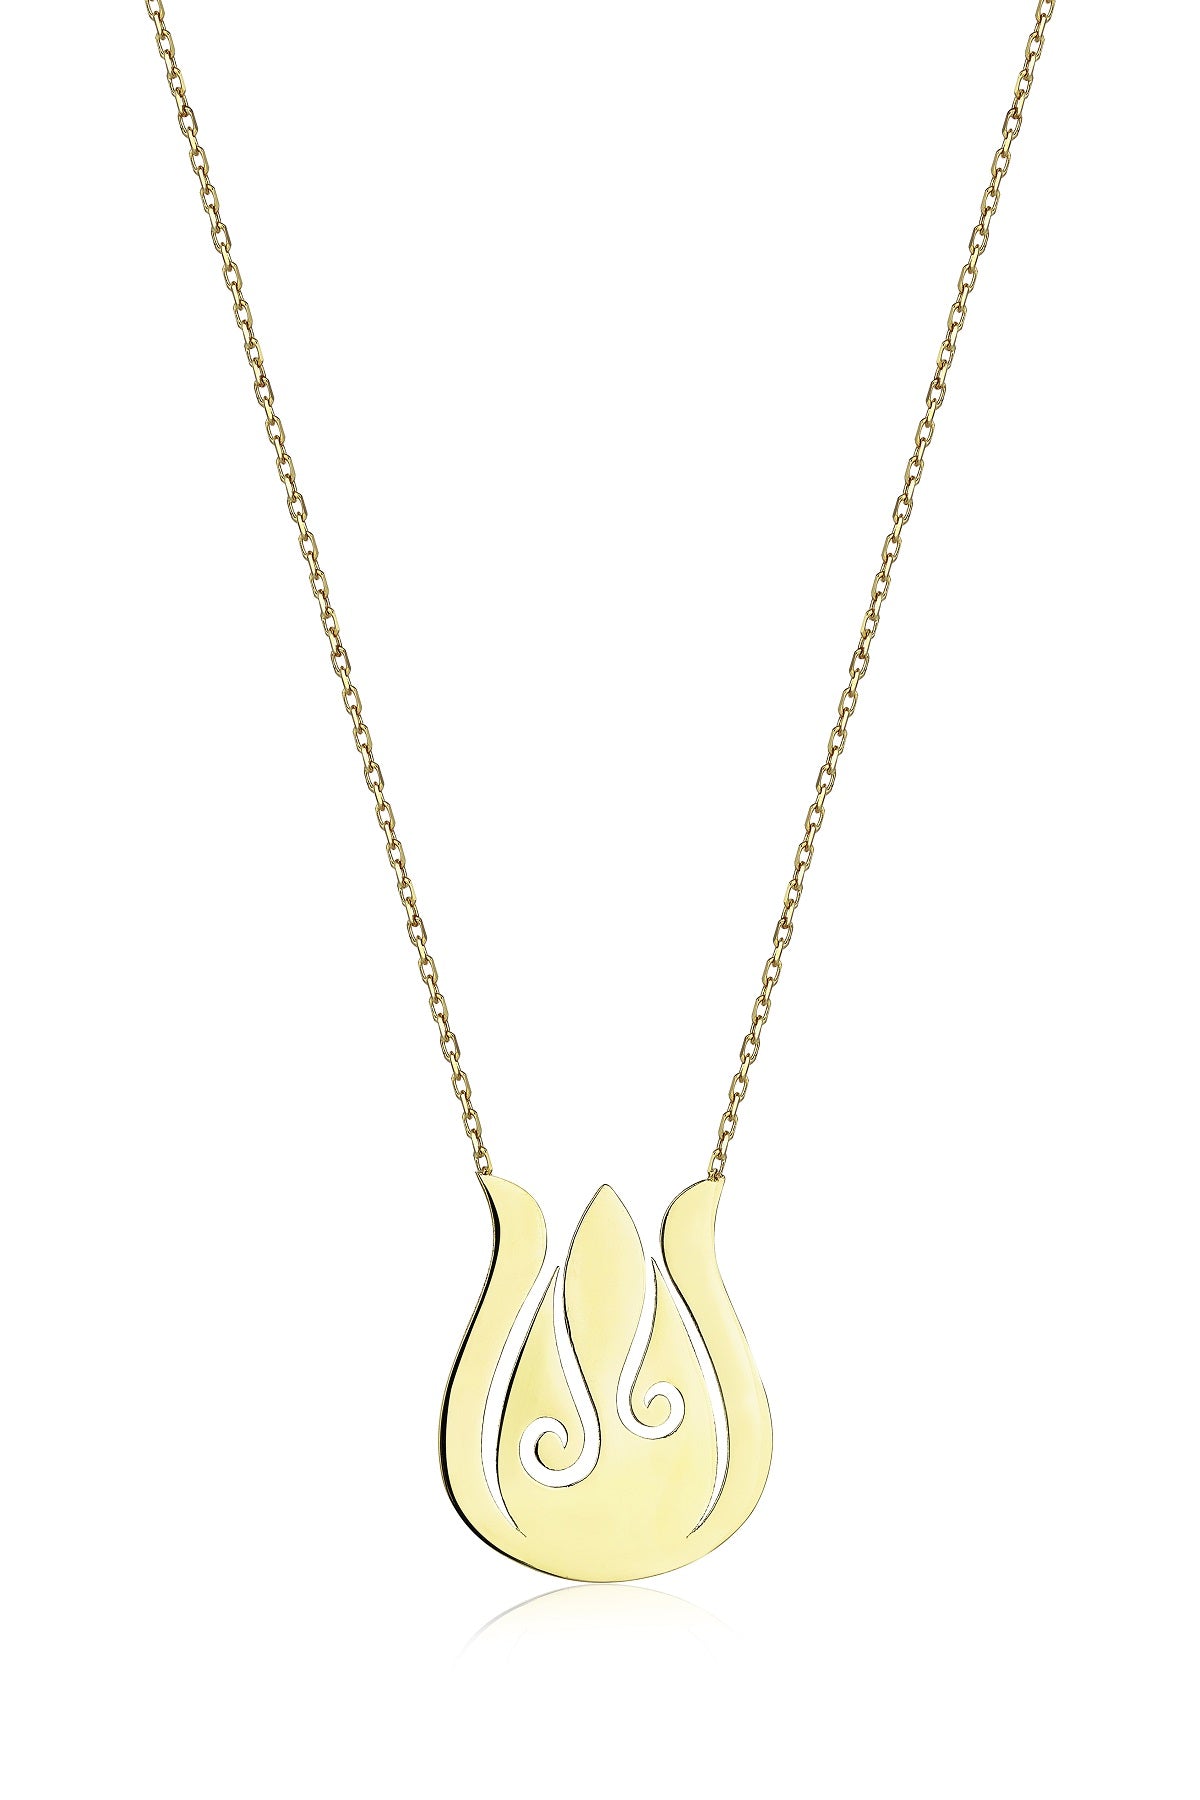 Special Design Gift 14k Gold Tulip Necklace